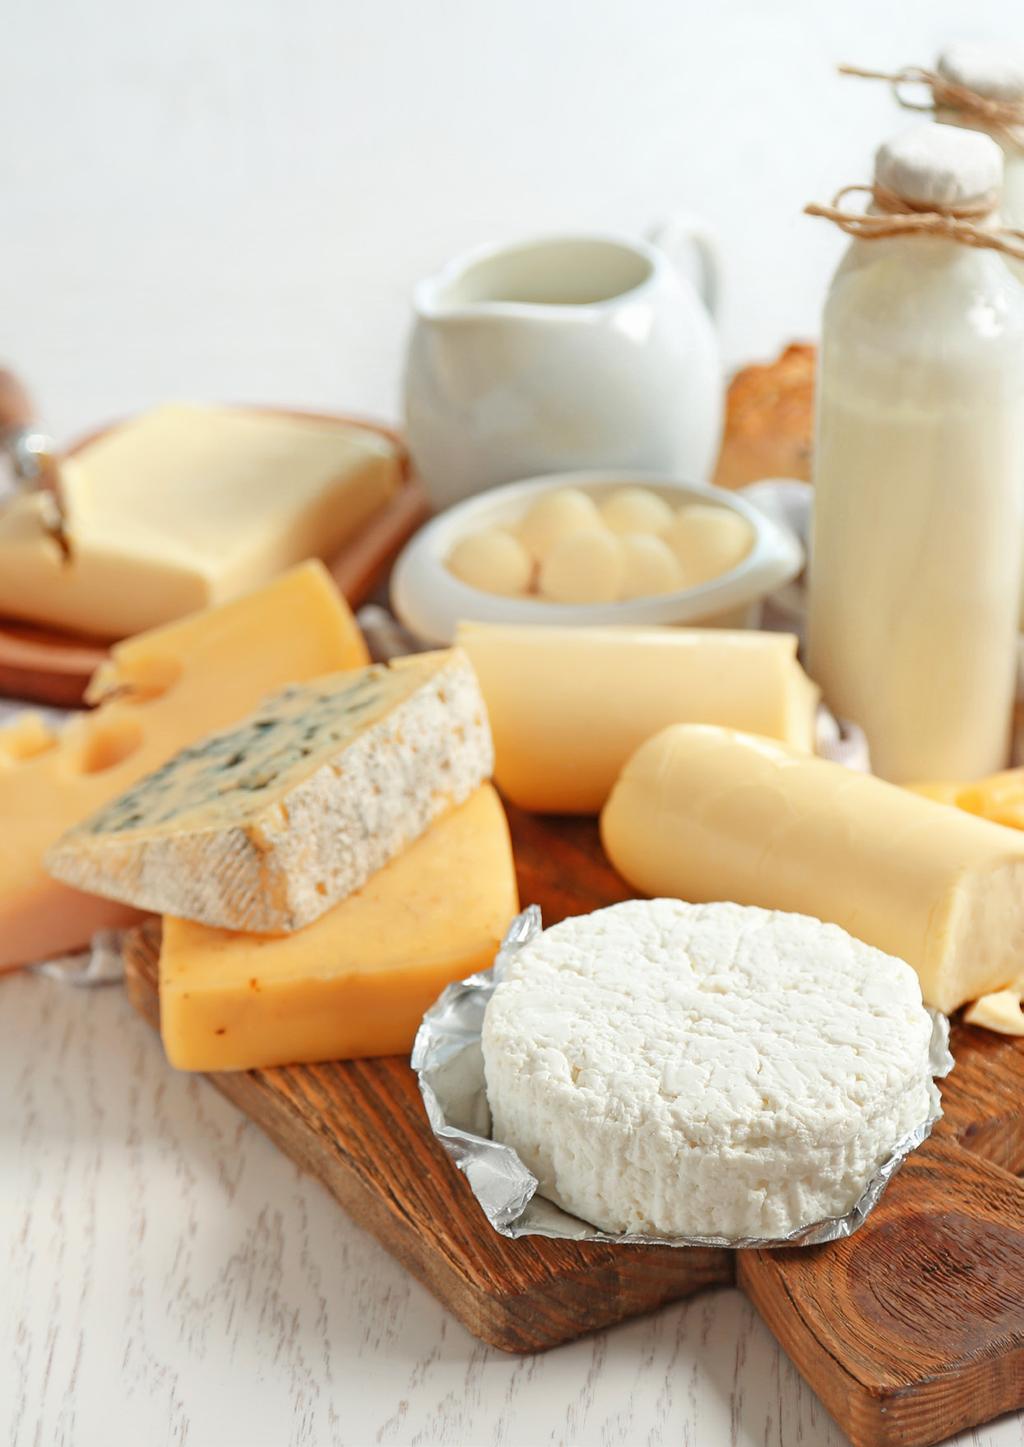 Cheese & Dairy Produce